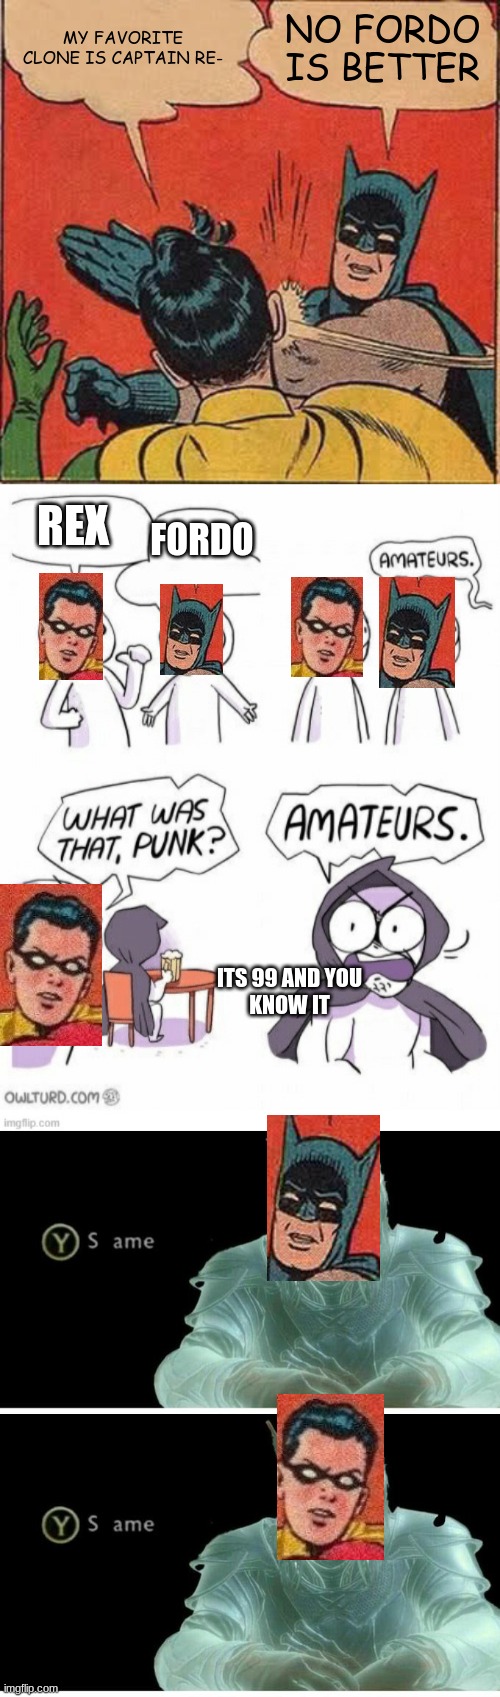  MY FAVORITE CLONE IS CAPTAIN RE-; NO FORDO IS BETTER; REX; FORDO; ITS 99 AND YOU
KNOW IT | image tagged in memes,batman slapping robin,amatuers meme,same | made w/ Imgflip meme maker